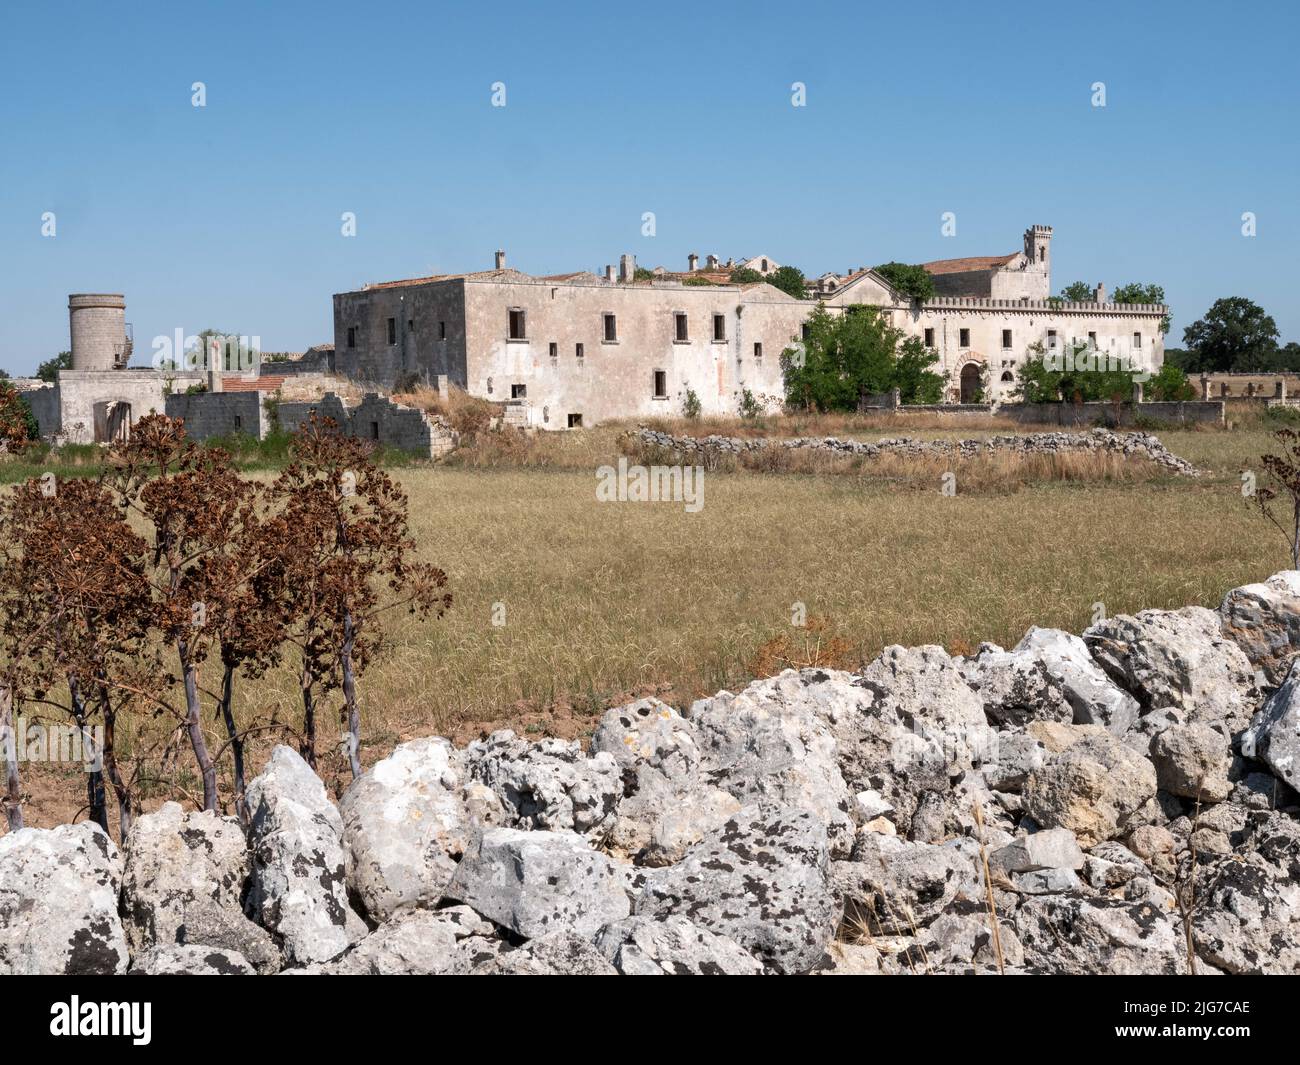 A rural estate with vast fields attached in an advanced state of disrepair in the Alberobello region of Puglia in southern Italy Stock Photo